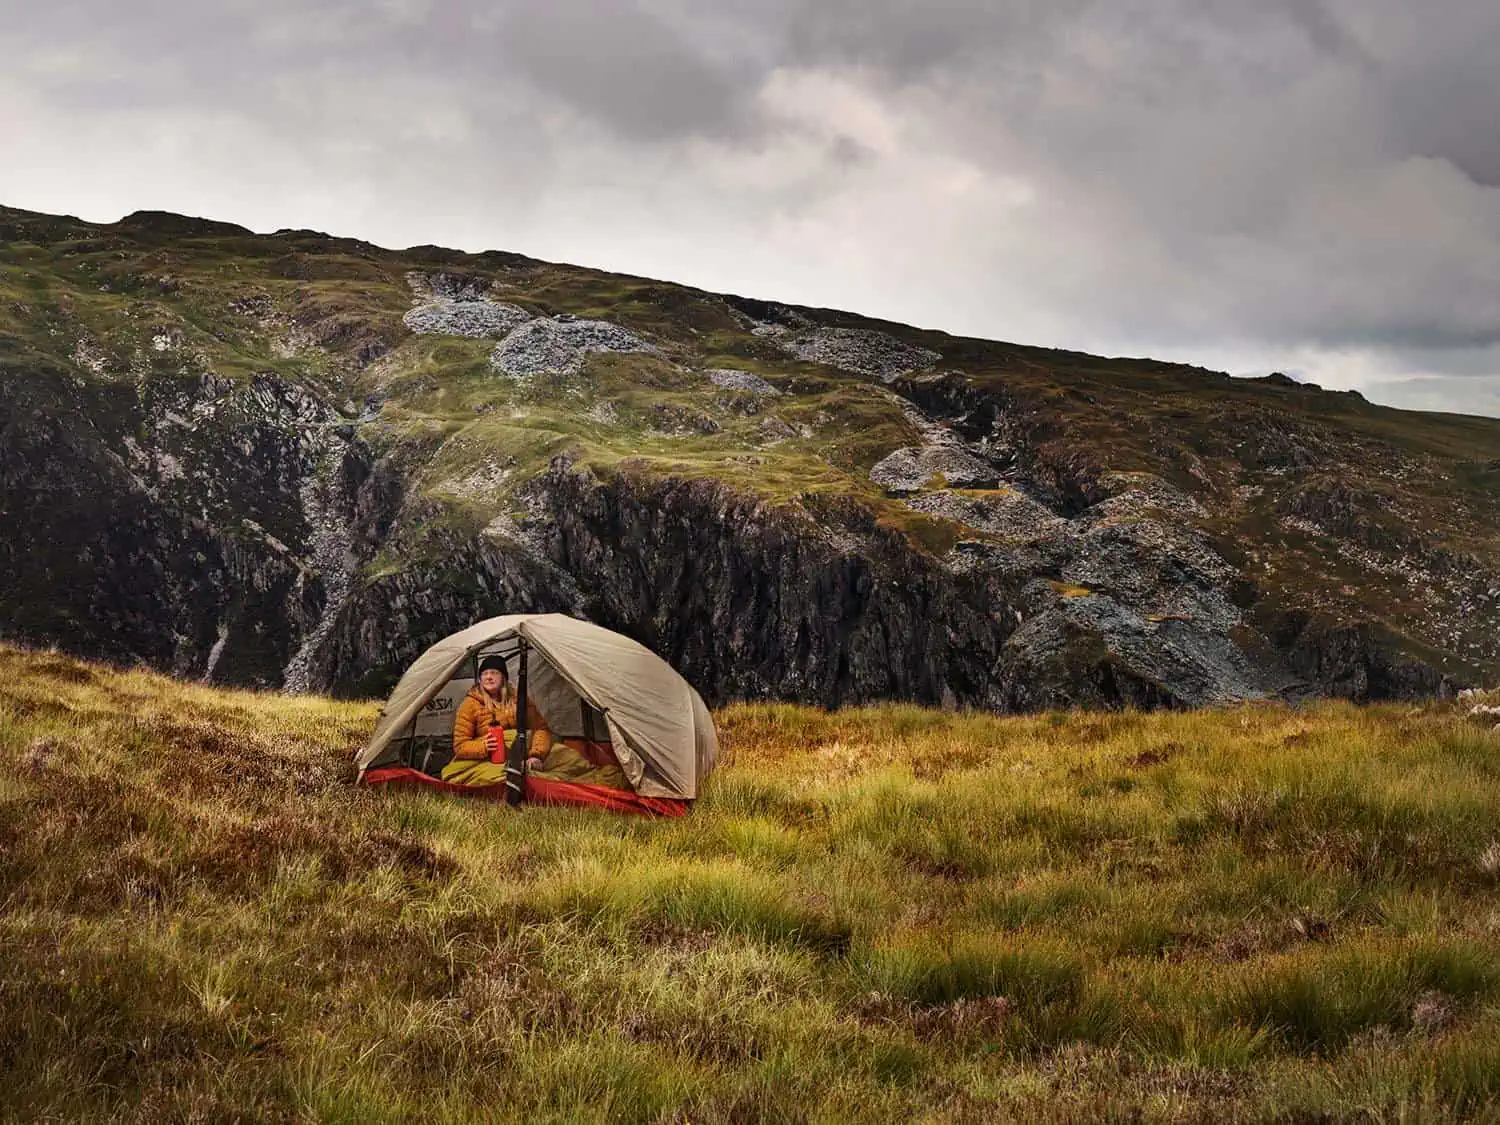 Person sits in Near Zero Ultrlight backpacking tent against mountainous background